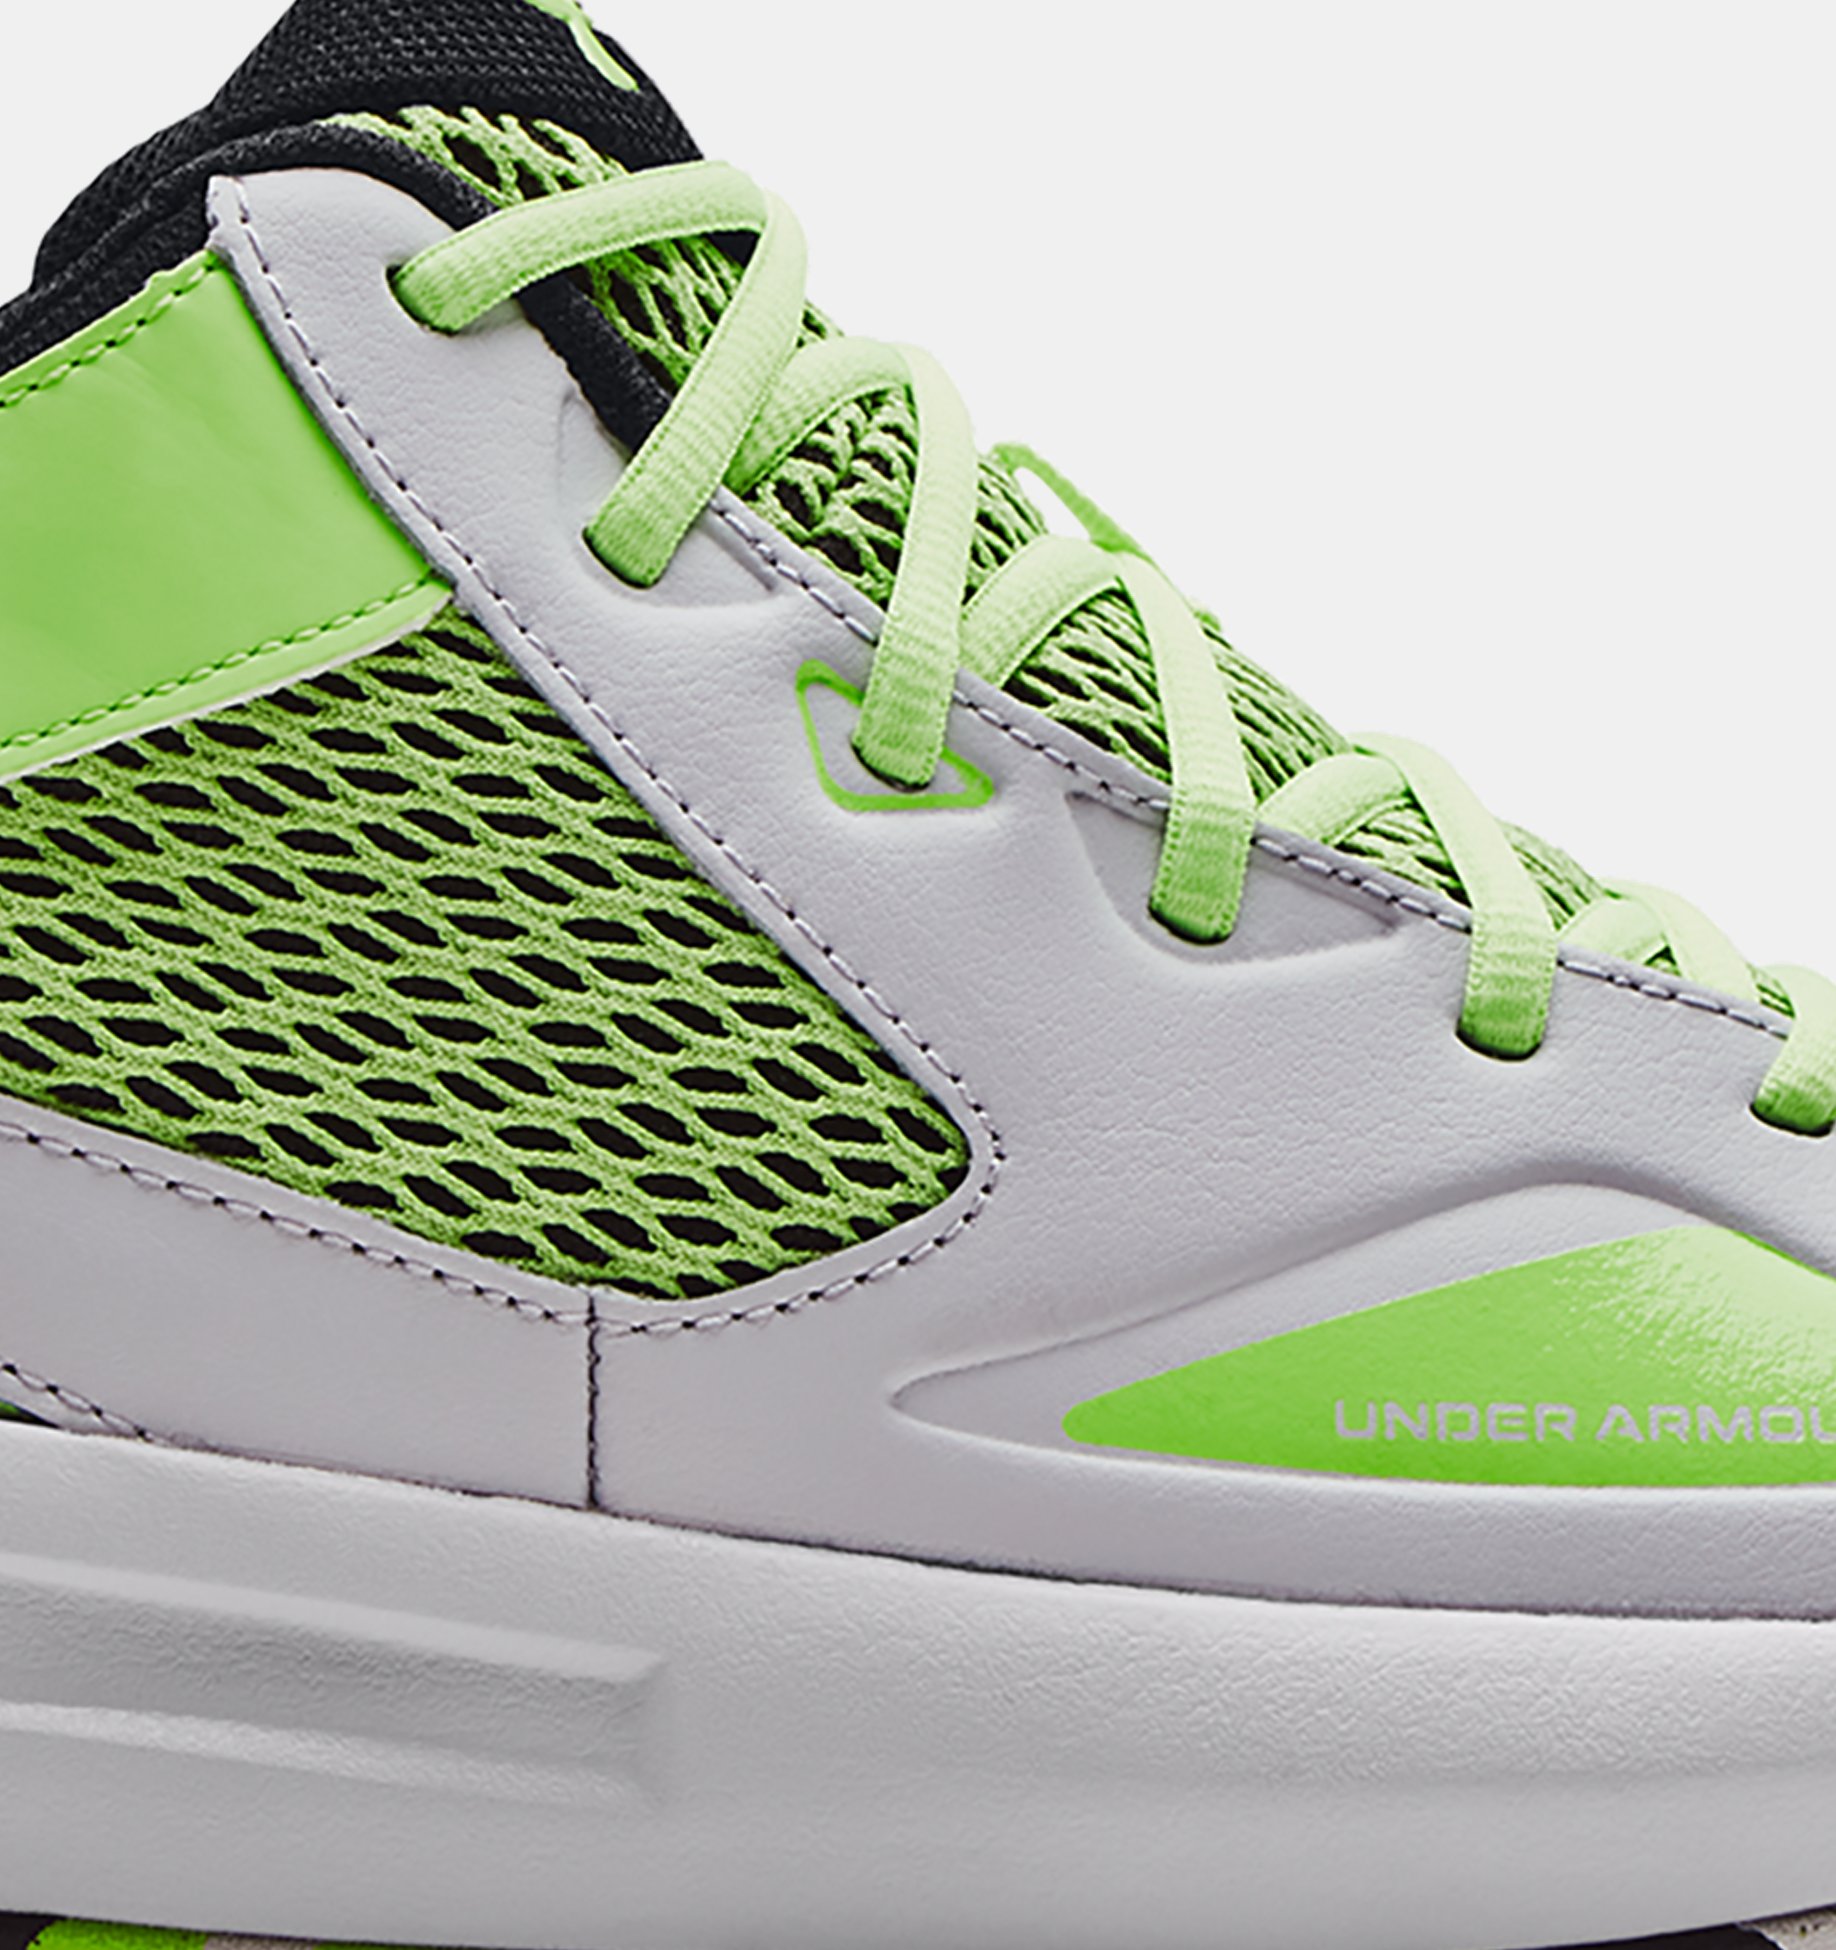 Lockdown 5 Basketball Shoes | Armour